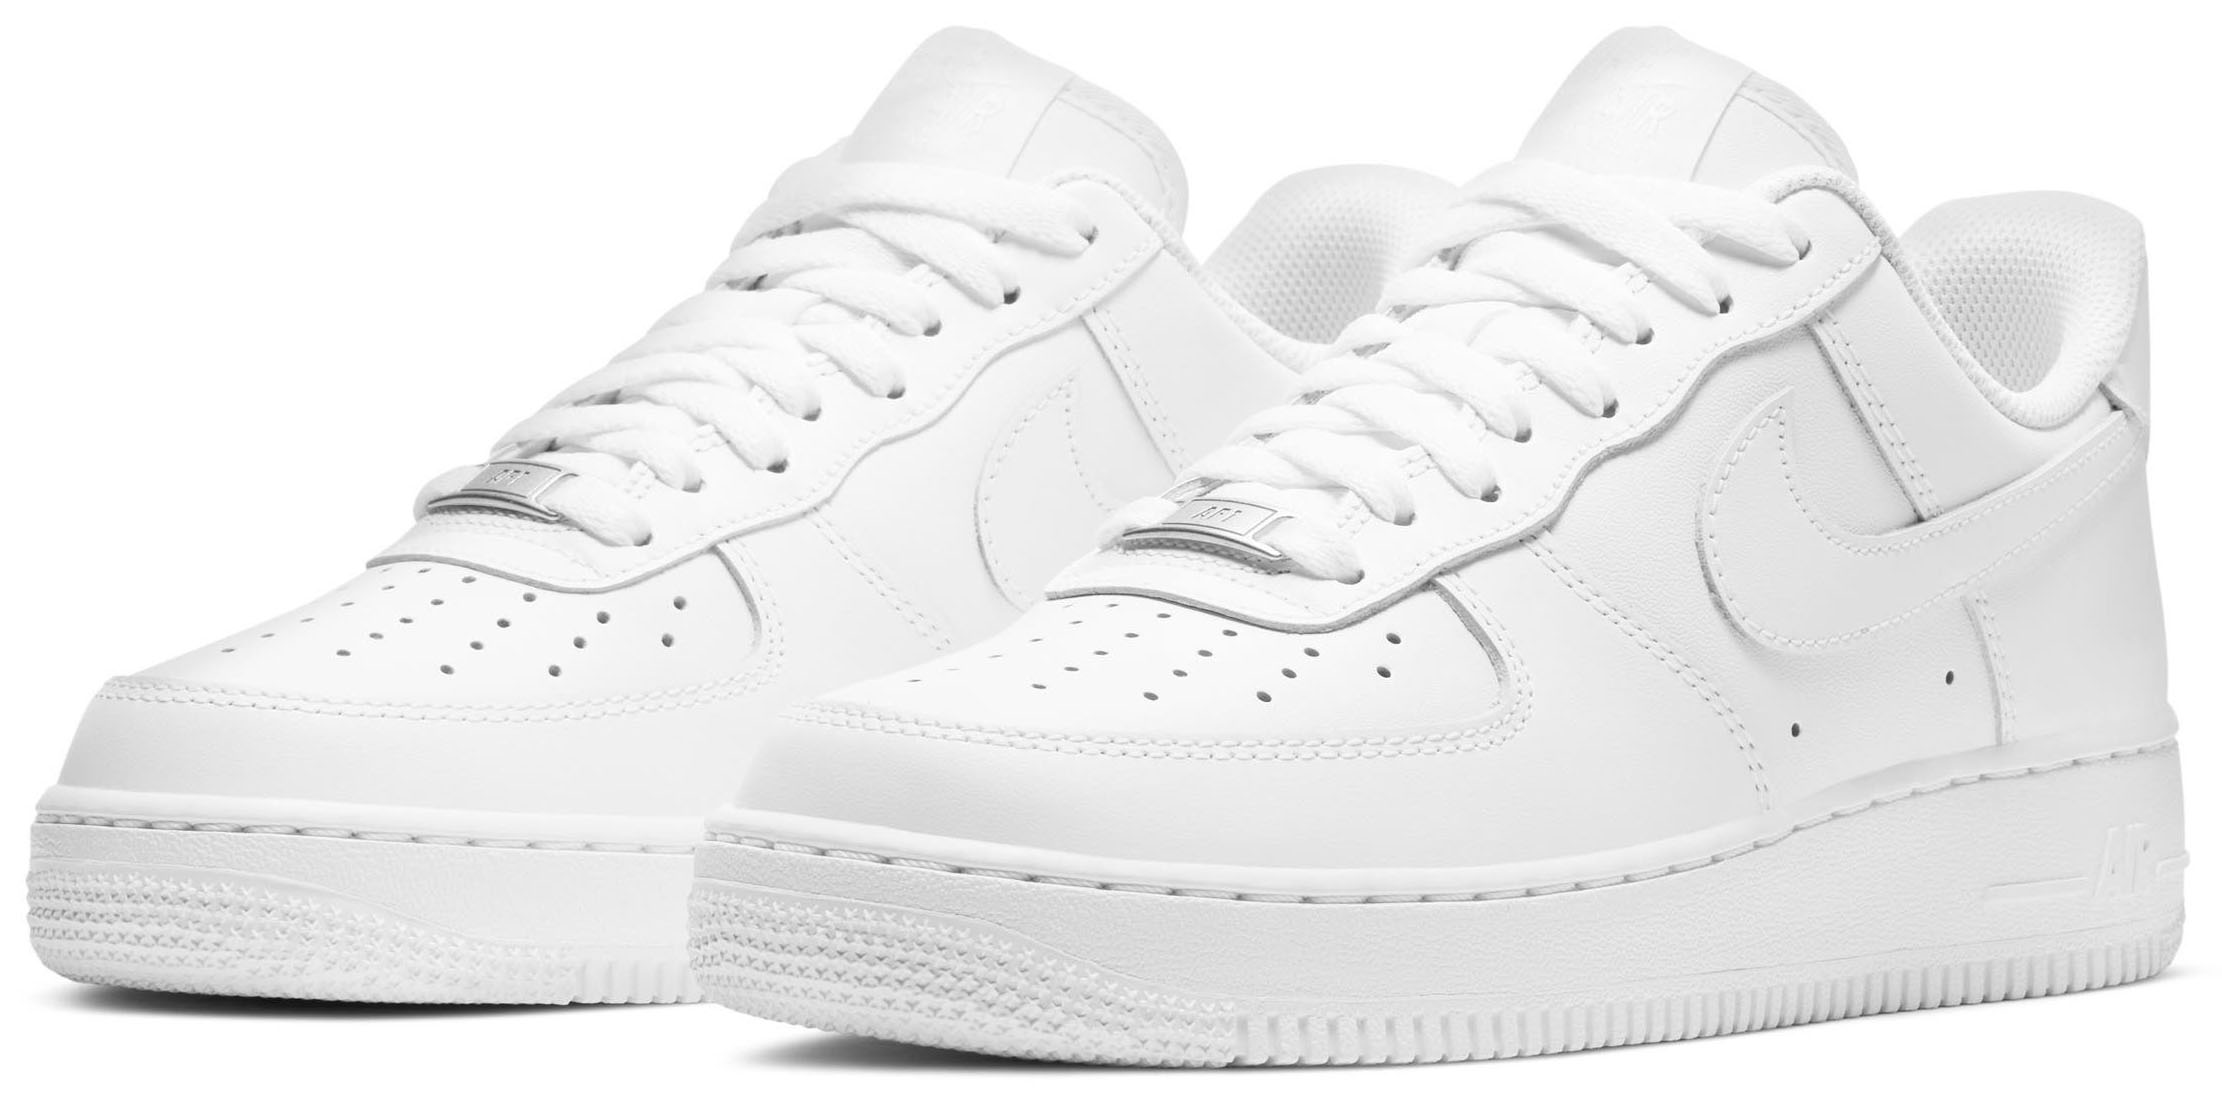 These 80s throwback sneakers feature a classic low-cut silhouette with perforations, crenellations along the tread, and Nike's Air cushioning unit